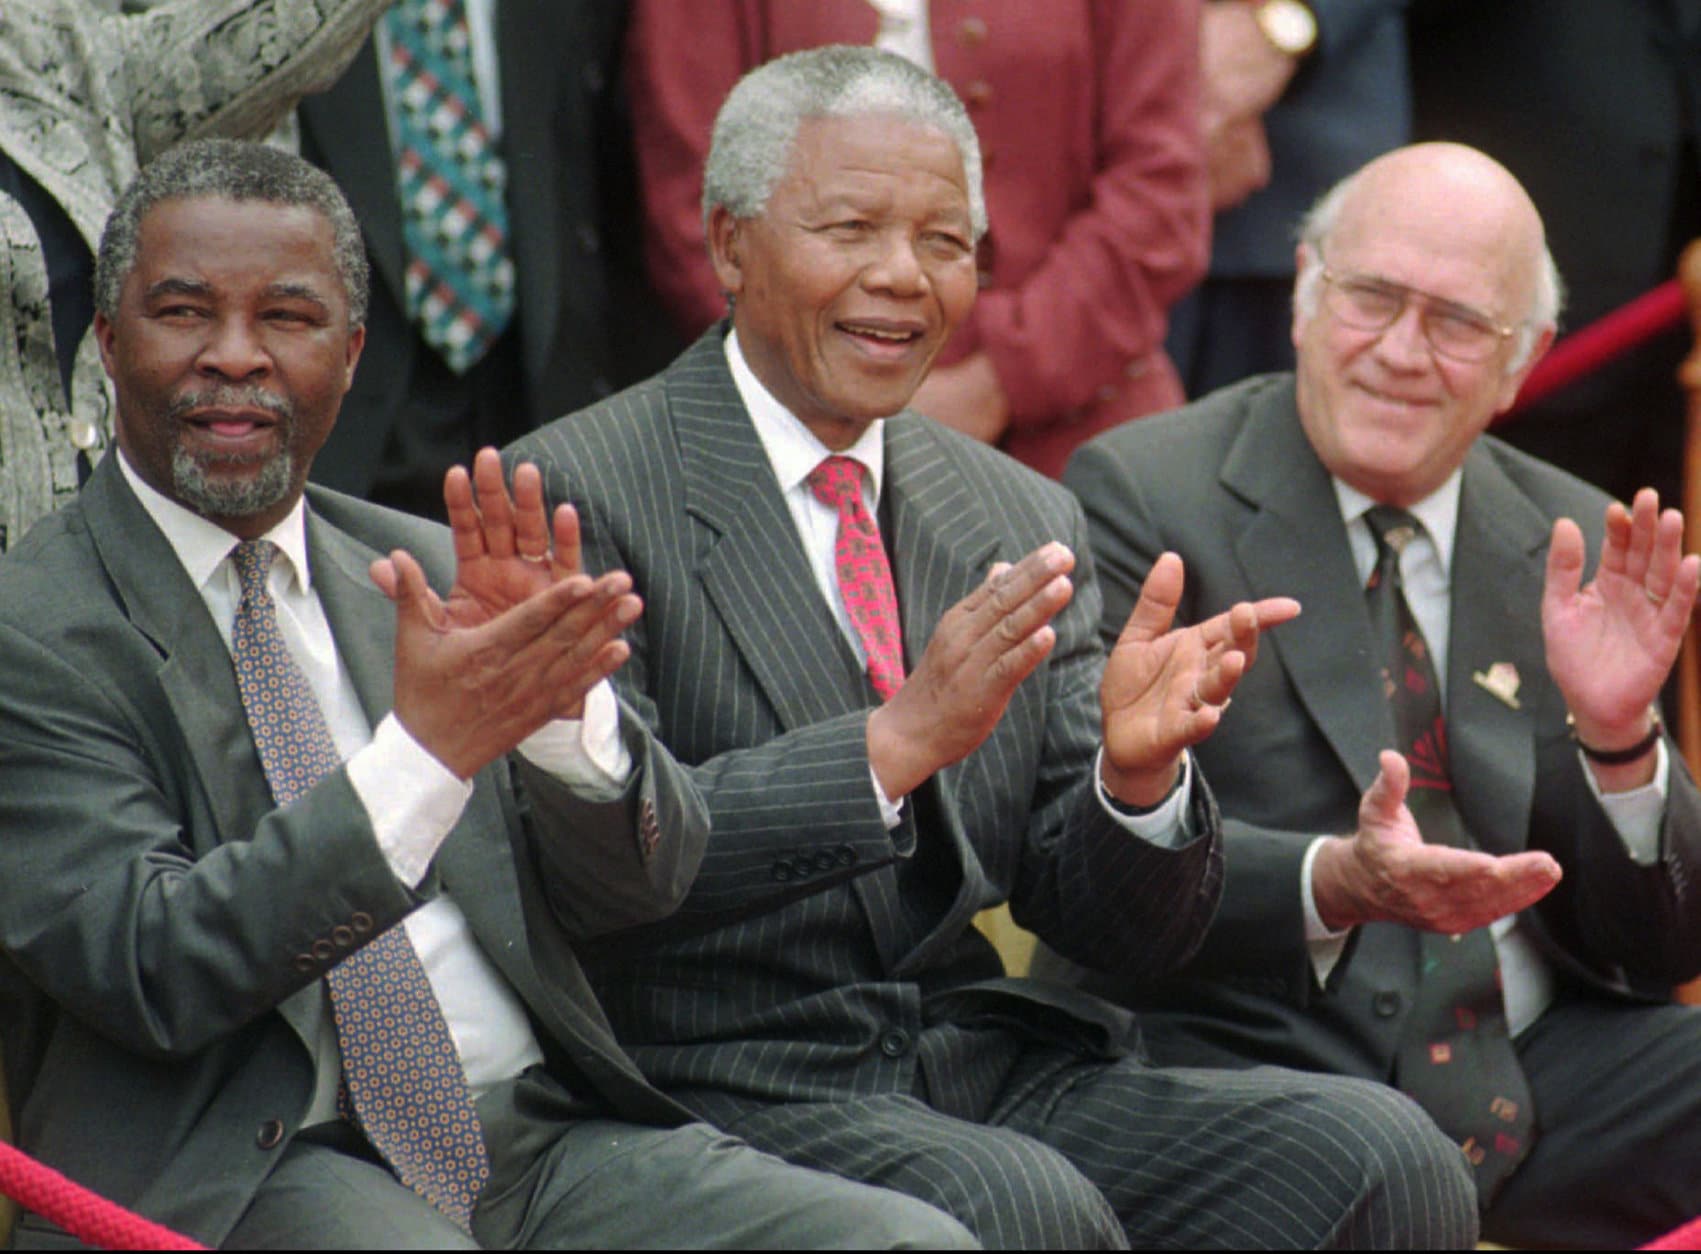 FILE - In this May 8, 1996 file photo, South African President Nelson Mandela, center, applauds along with his two deputy presidents, Thabo Mbeki, left, and F.W. de Klerk, after a new constitution was approved by the Constitutional Assembly in Cape Town, South Africa.   South Africa's president Jacob Zuma says, Thursday, Dec. 5, 2013, that Mandela has died. He was 95.  (AP Photo/Argus, Leon Muller, File)